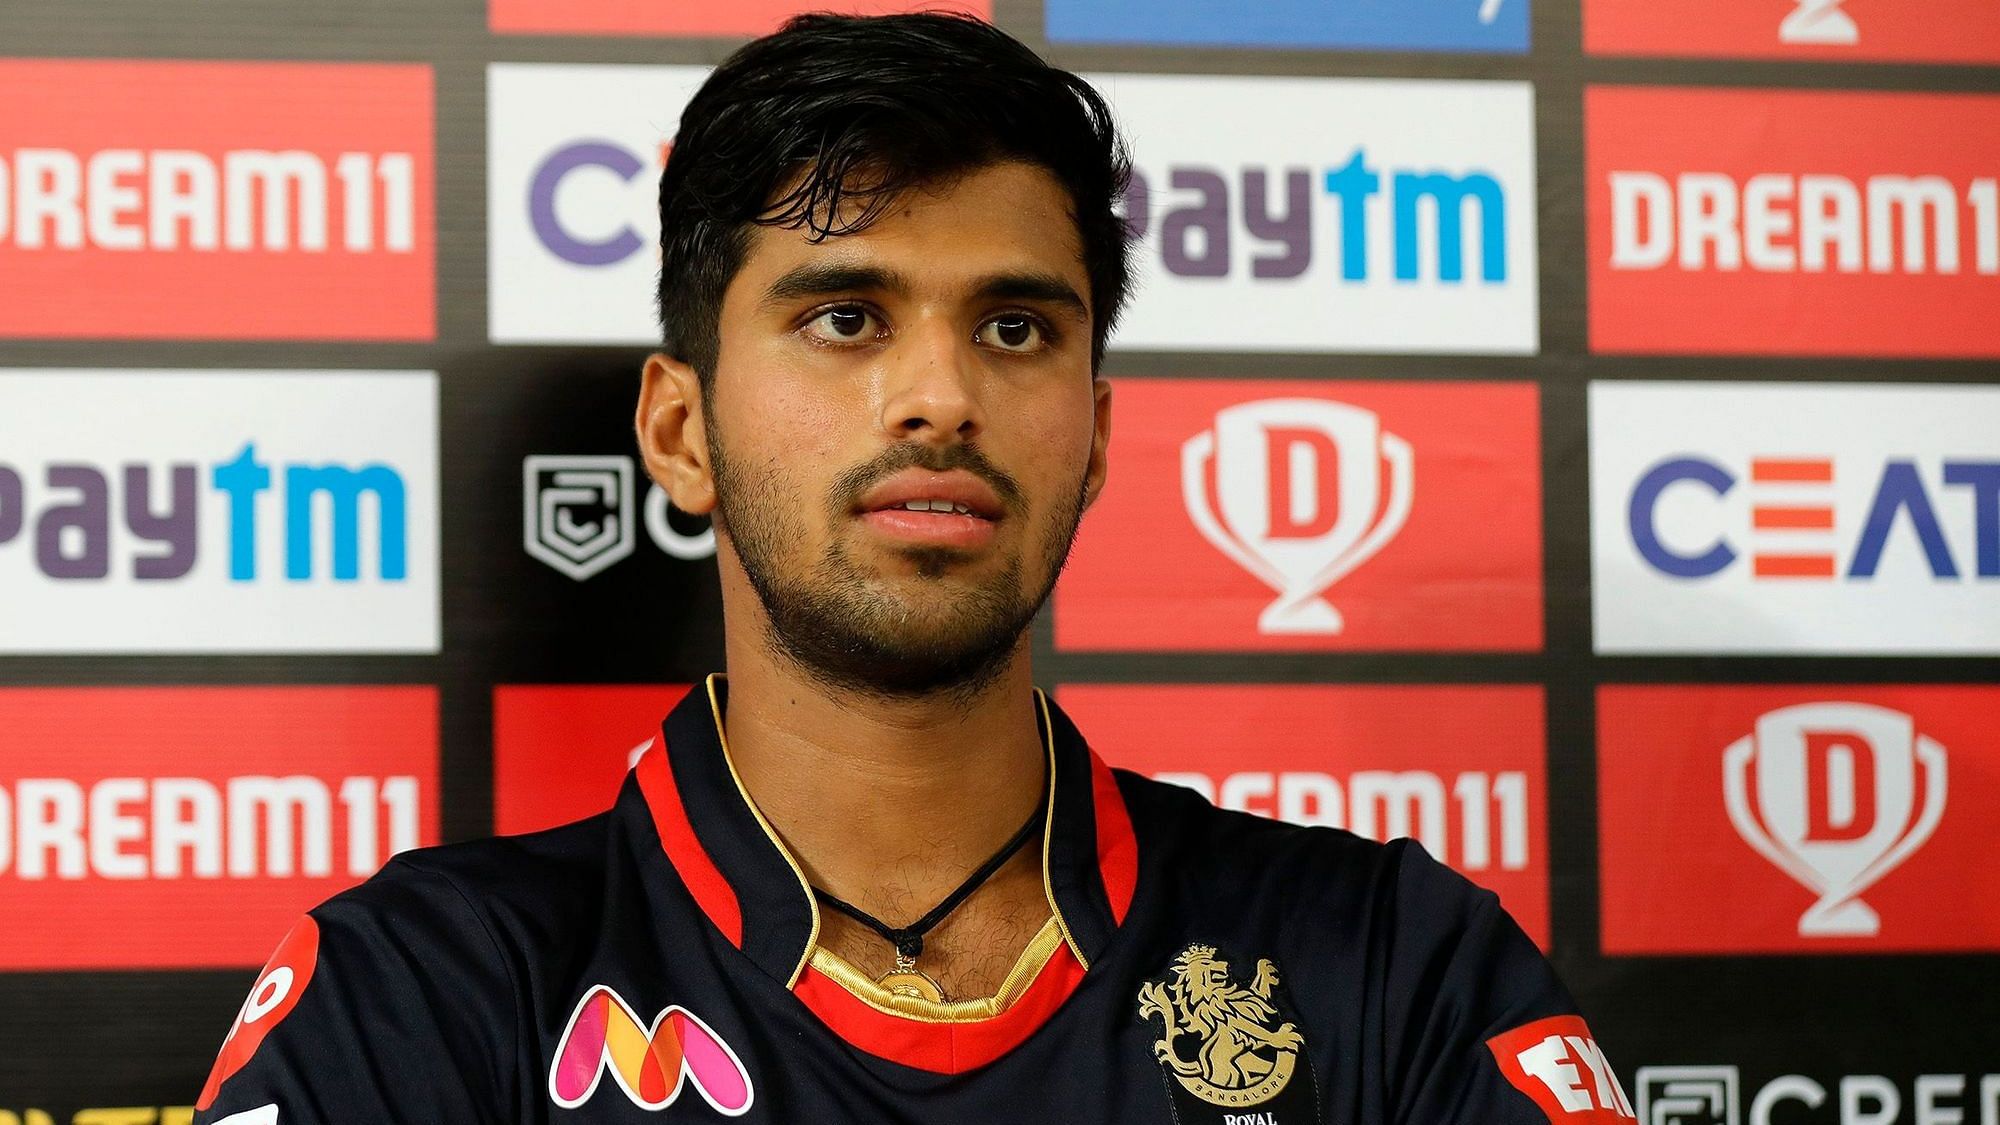 Royal Challengers Bangalore’s off-spinner Washington Sundar bowled an economical spell to pull the game in his team’s favour